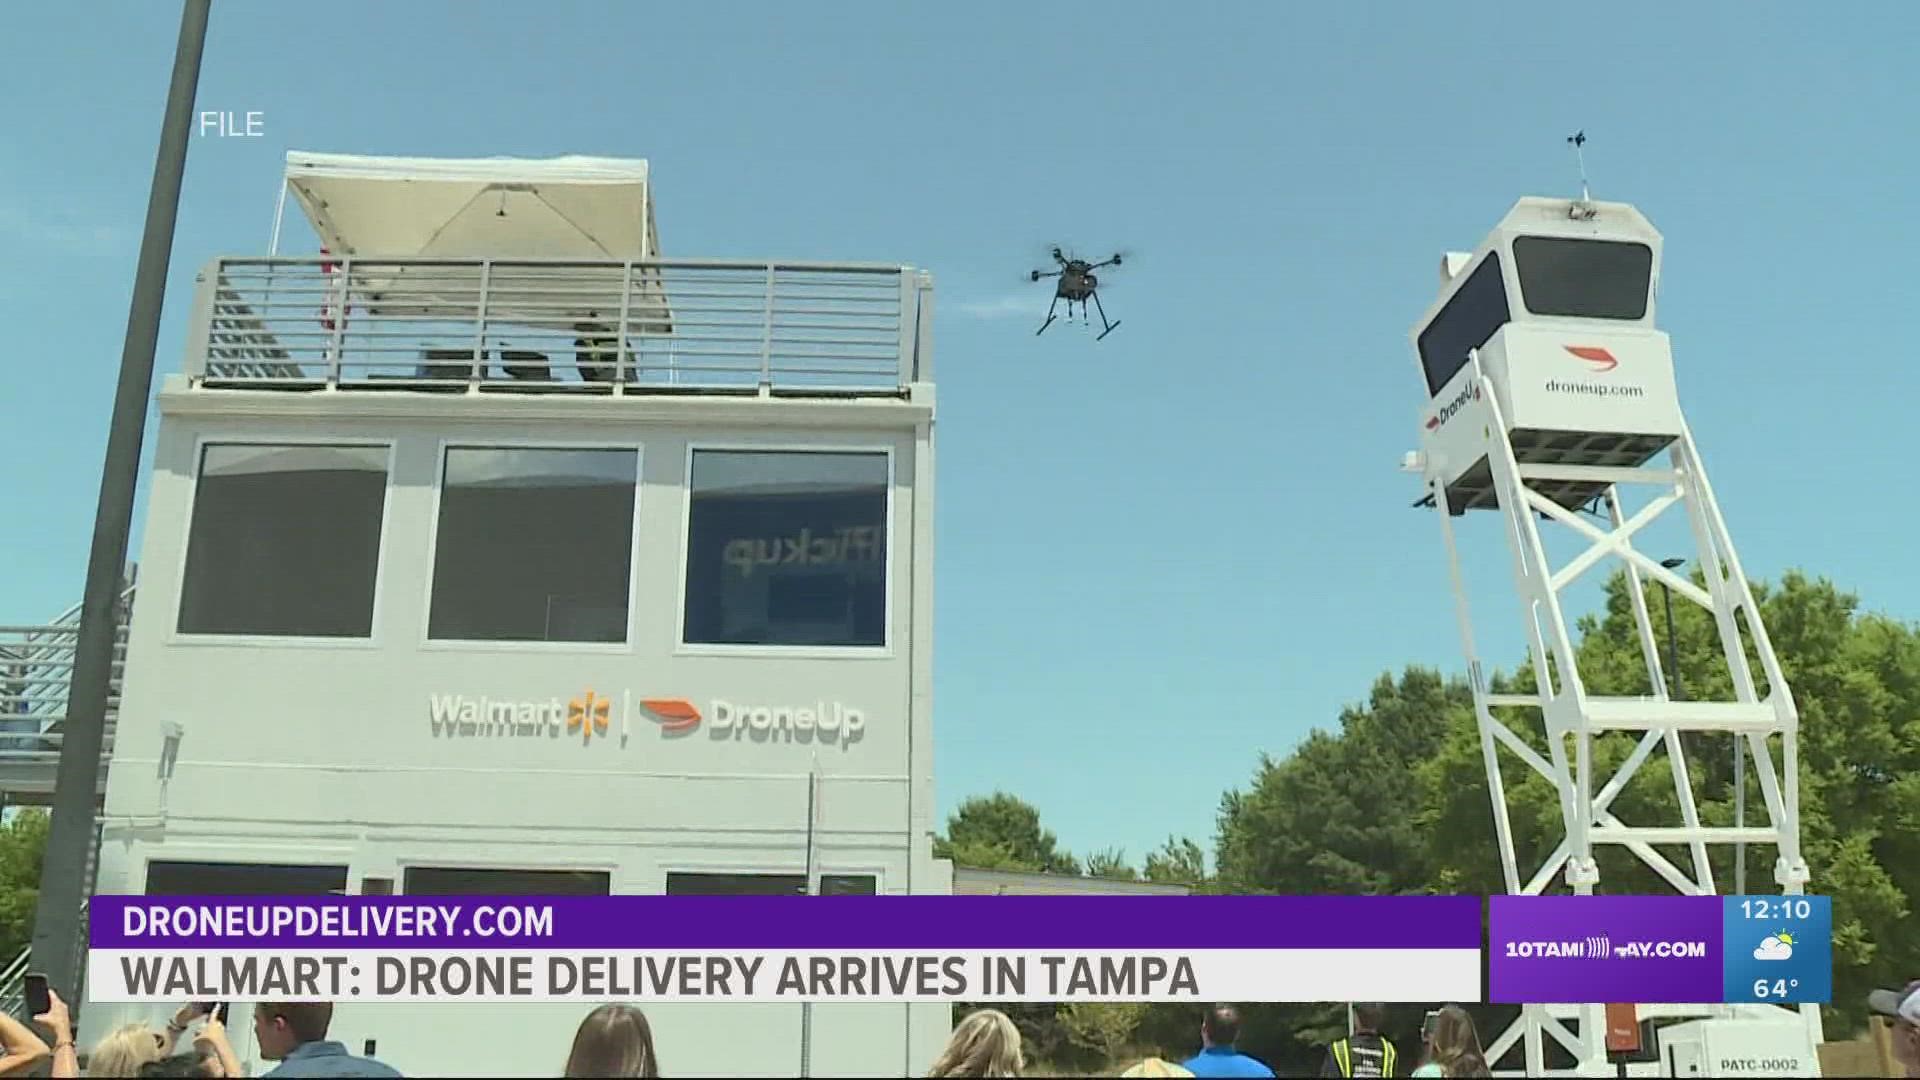 Walmart announced drones will fly from five stores across Tampa Bay in New Port Richey, Valrico, Winter Haven, Tampa and Brandon.